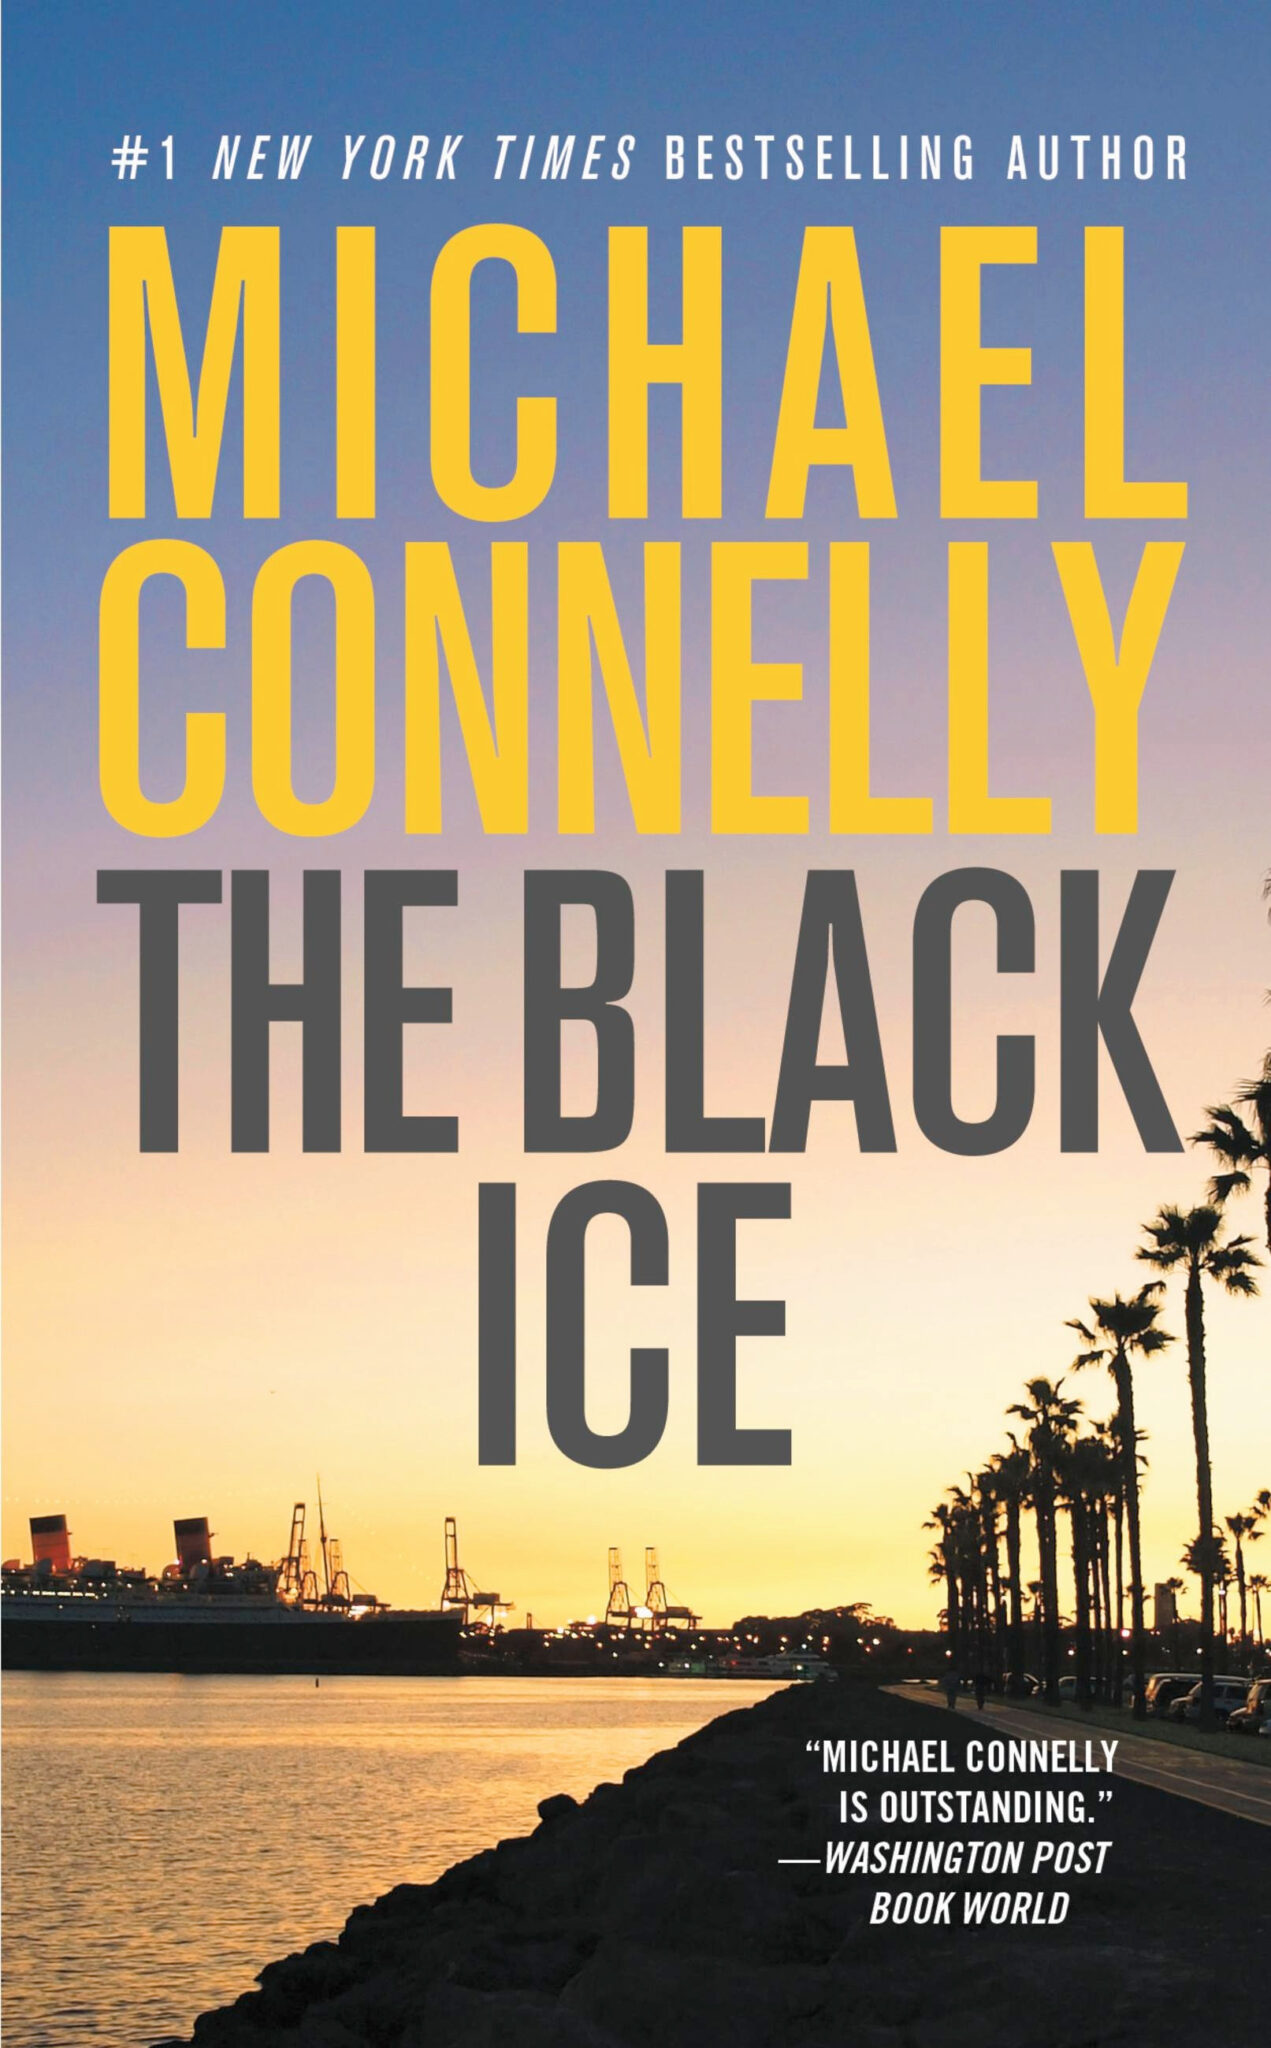 Michael Connelly books 2